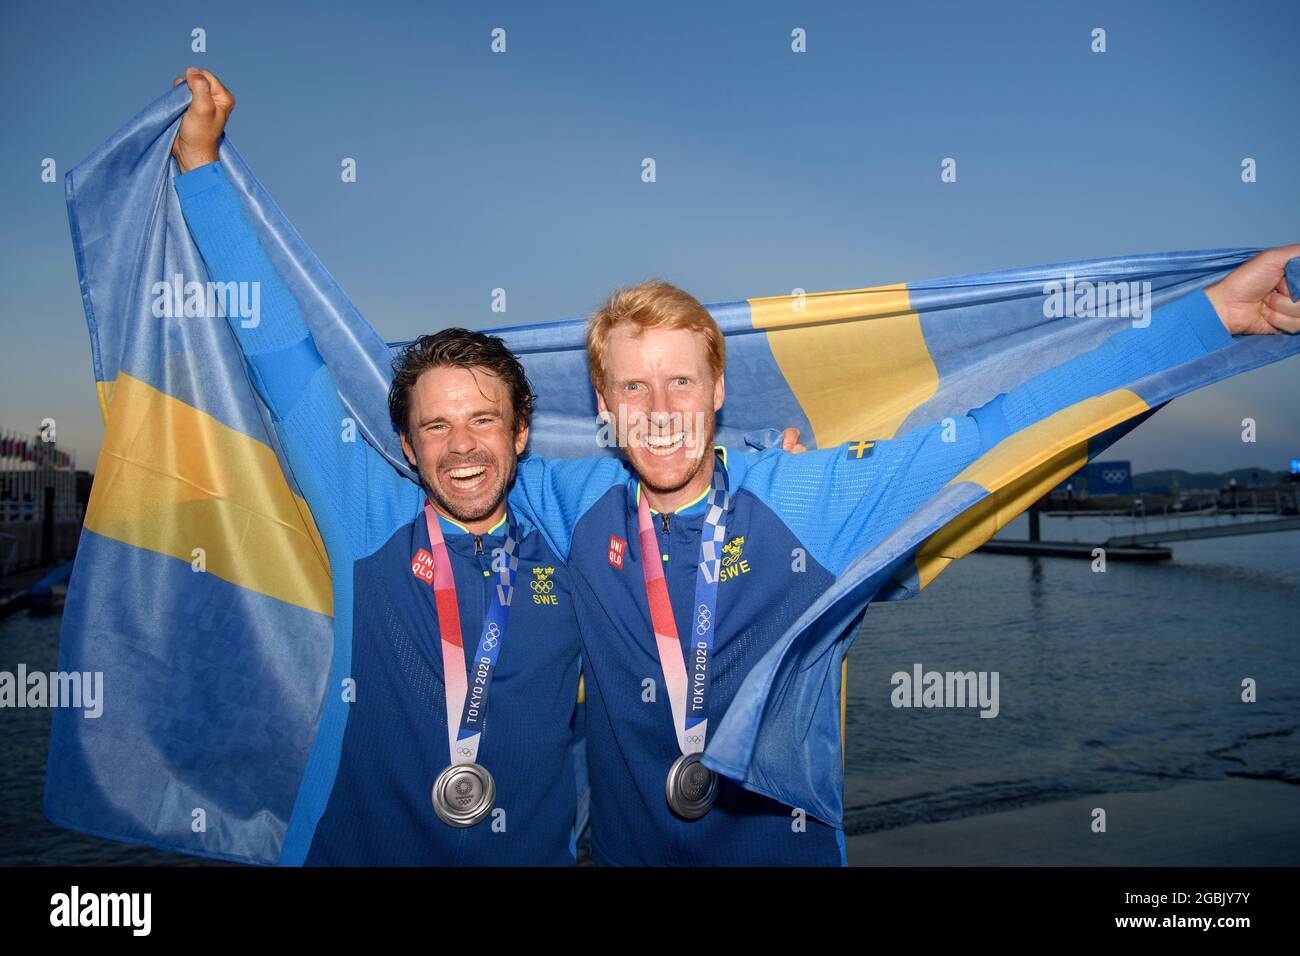 Team Sweden - Anton Dahlberg and Fredrik Bergström  (silver medal),  August 4th, 2021 - Sailing : Men's Two Person Dinghy - 470 - Medal Ceremony during the Tokyo 2020 Olympic Games at the Enoshima Yacht Harbour in Kanagawa, Japan. Tokyo Olympic Games 2020 - Sailing, Enoshima, Japan - 04 Aug 2021   (c)  Henrik Montgomery / TT / kod 10060 Stock Photo